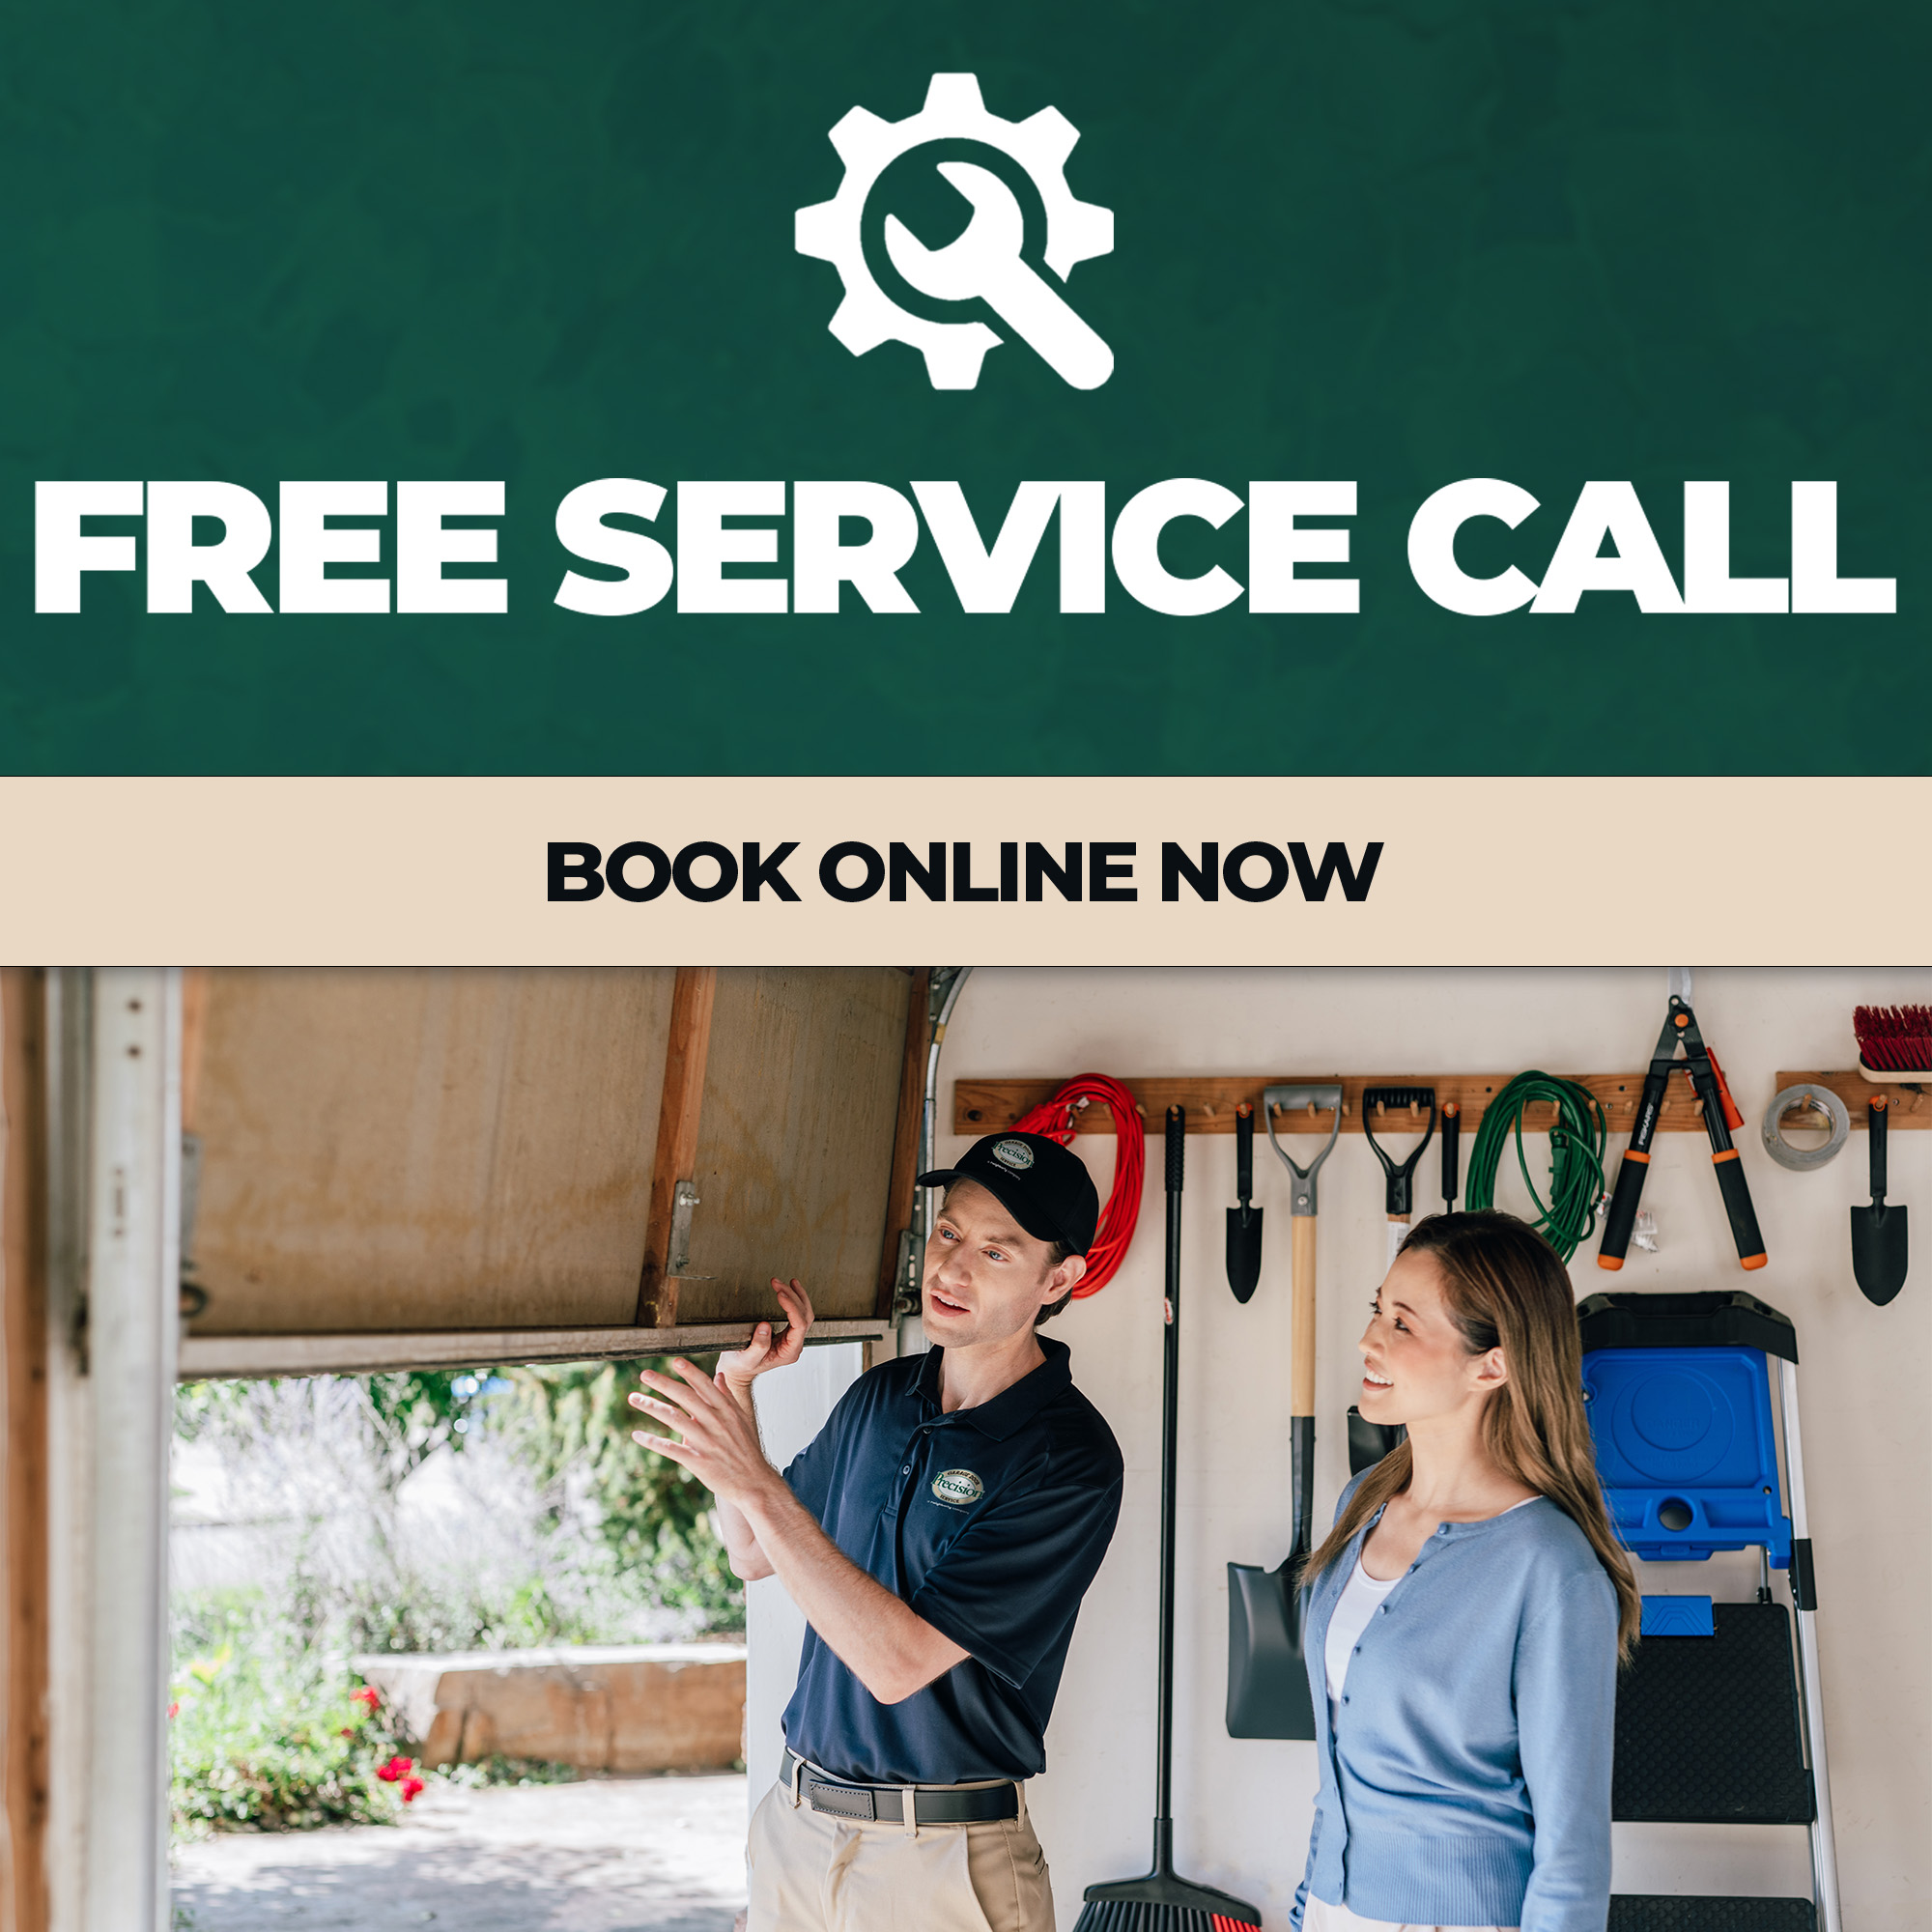 Free Service Call with Any Repair Over $100